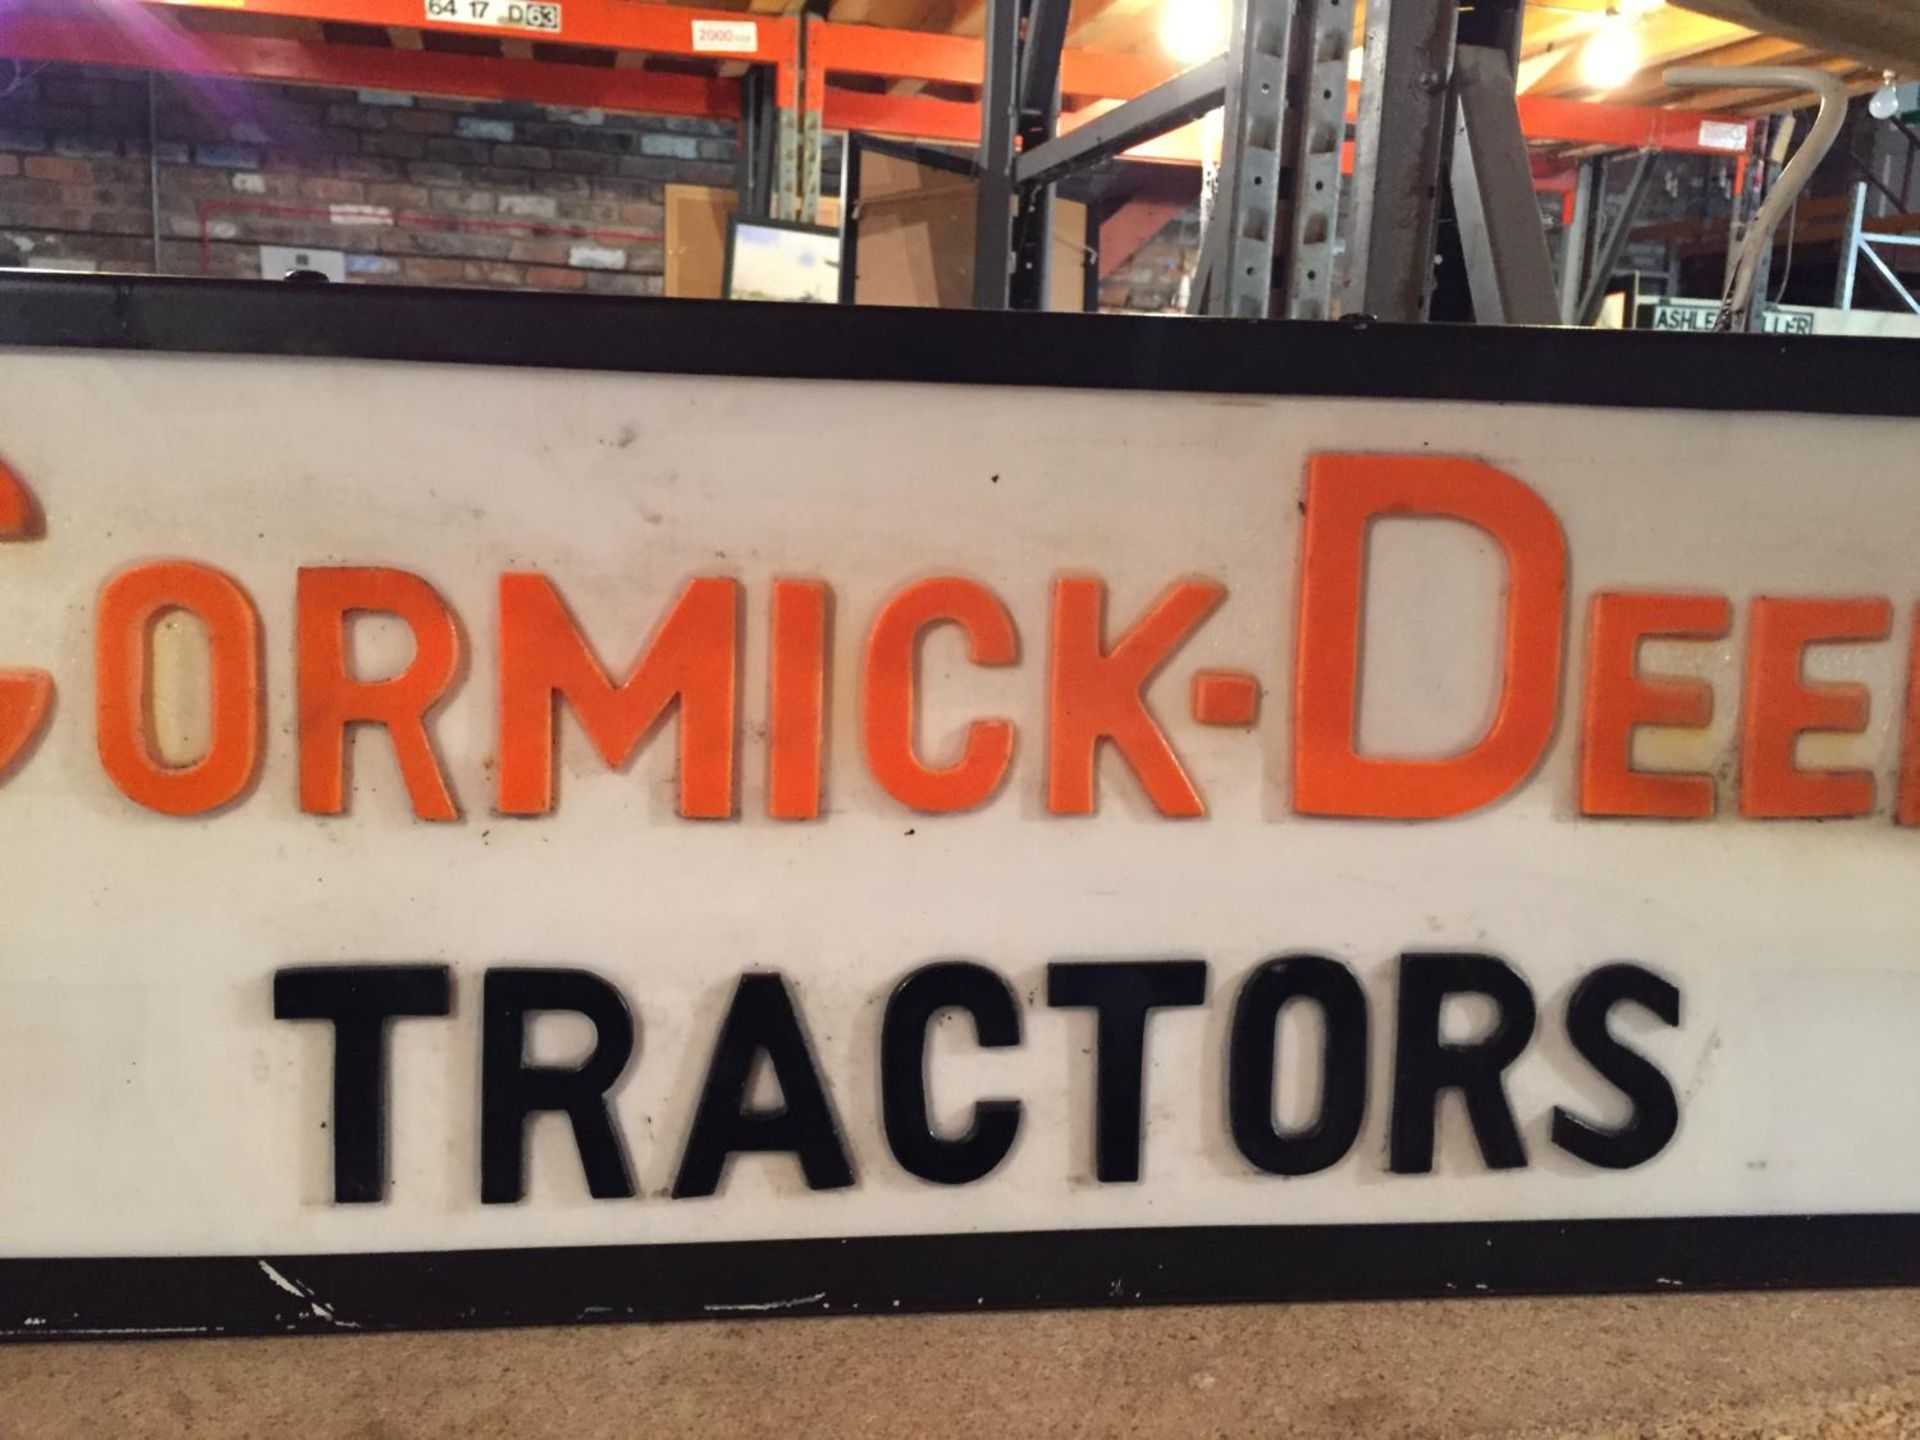 A McCORMICK-DEERING TRACTORS ILLUMINATED SIGN - Image 4 of 6